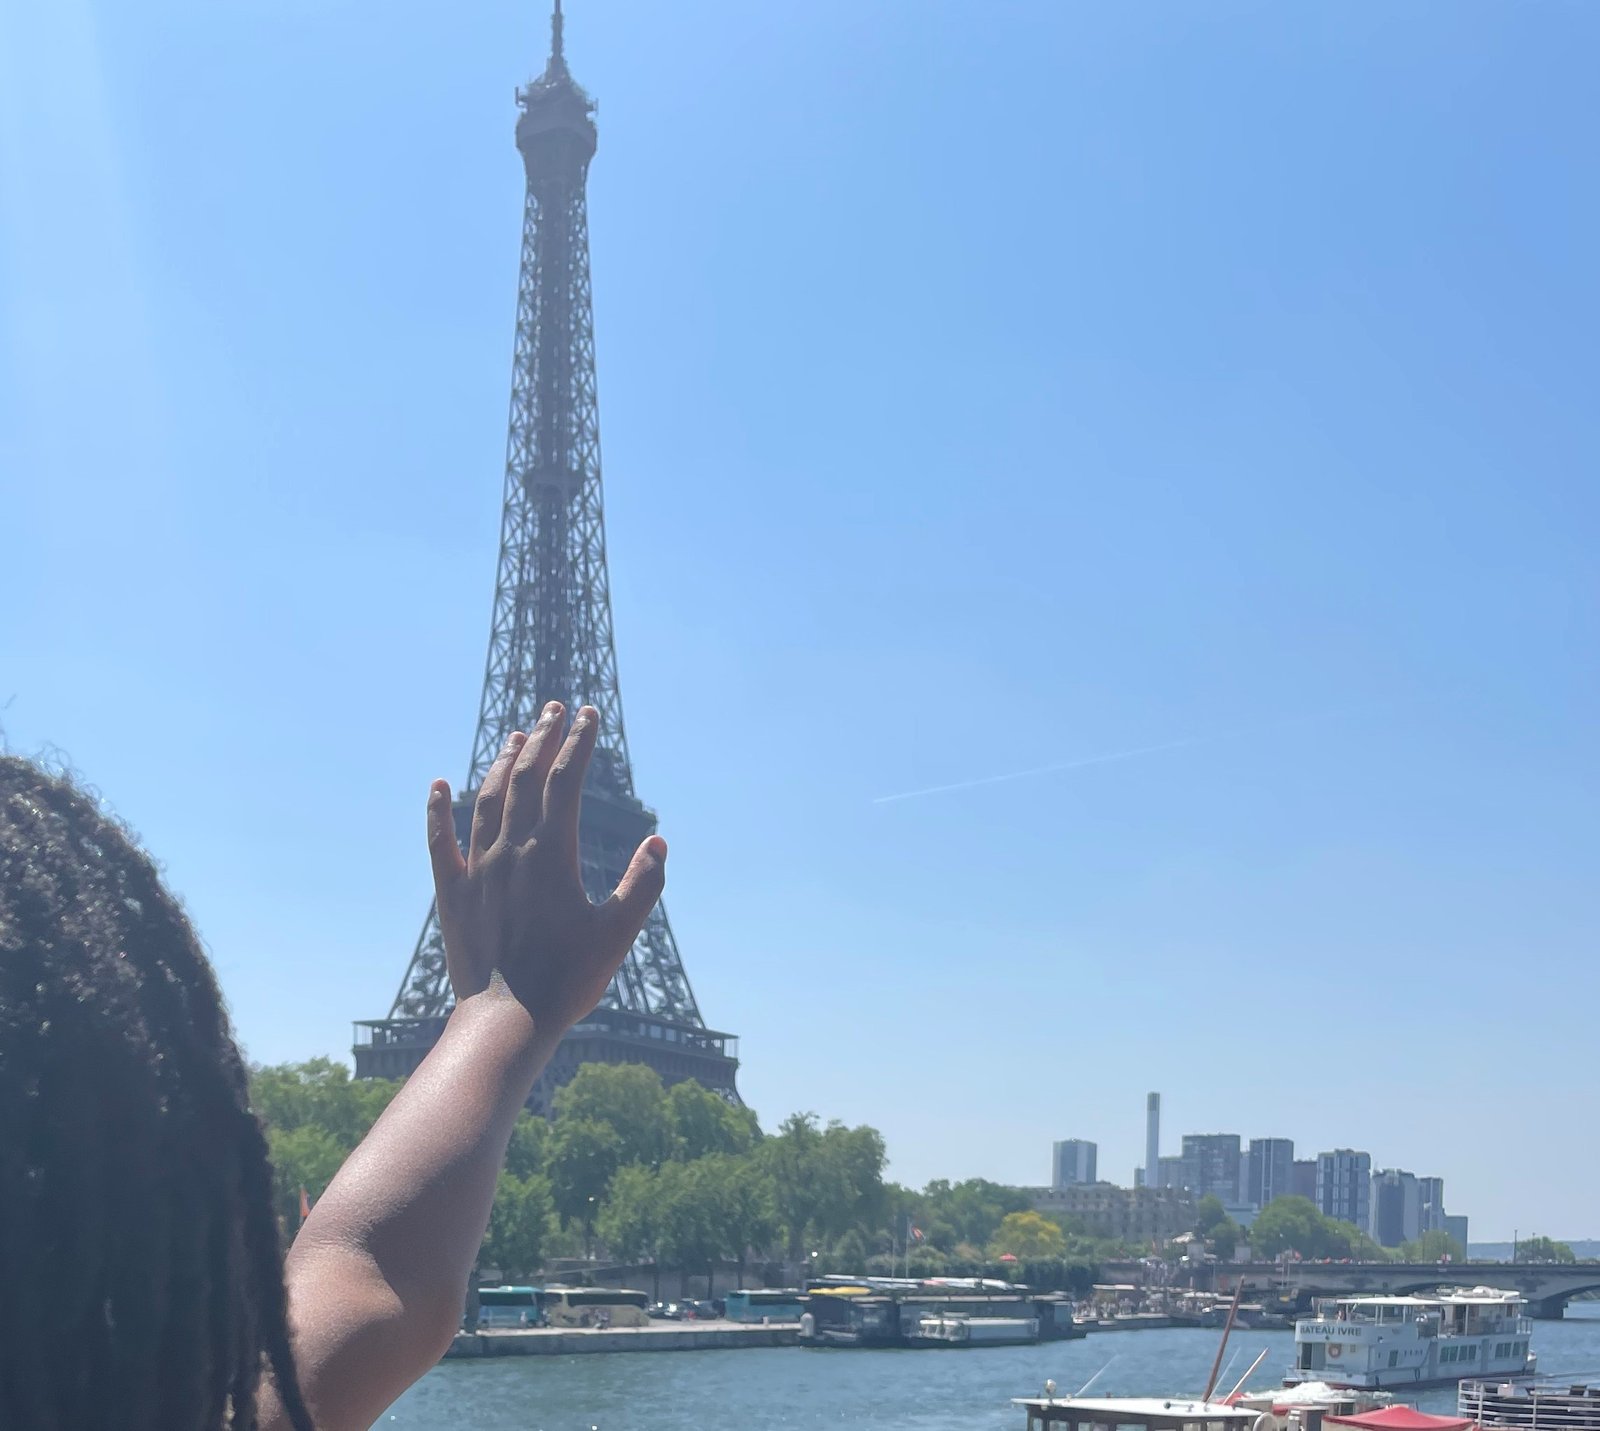 Touching the eiffel tower